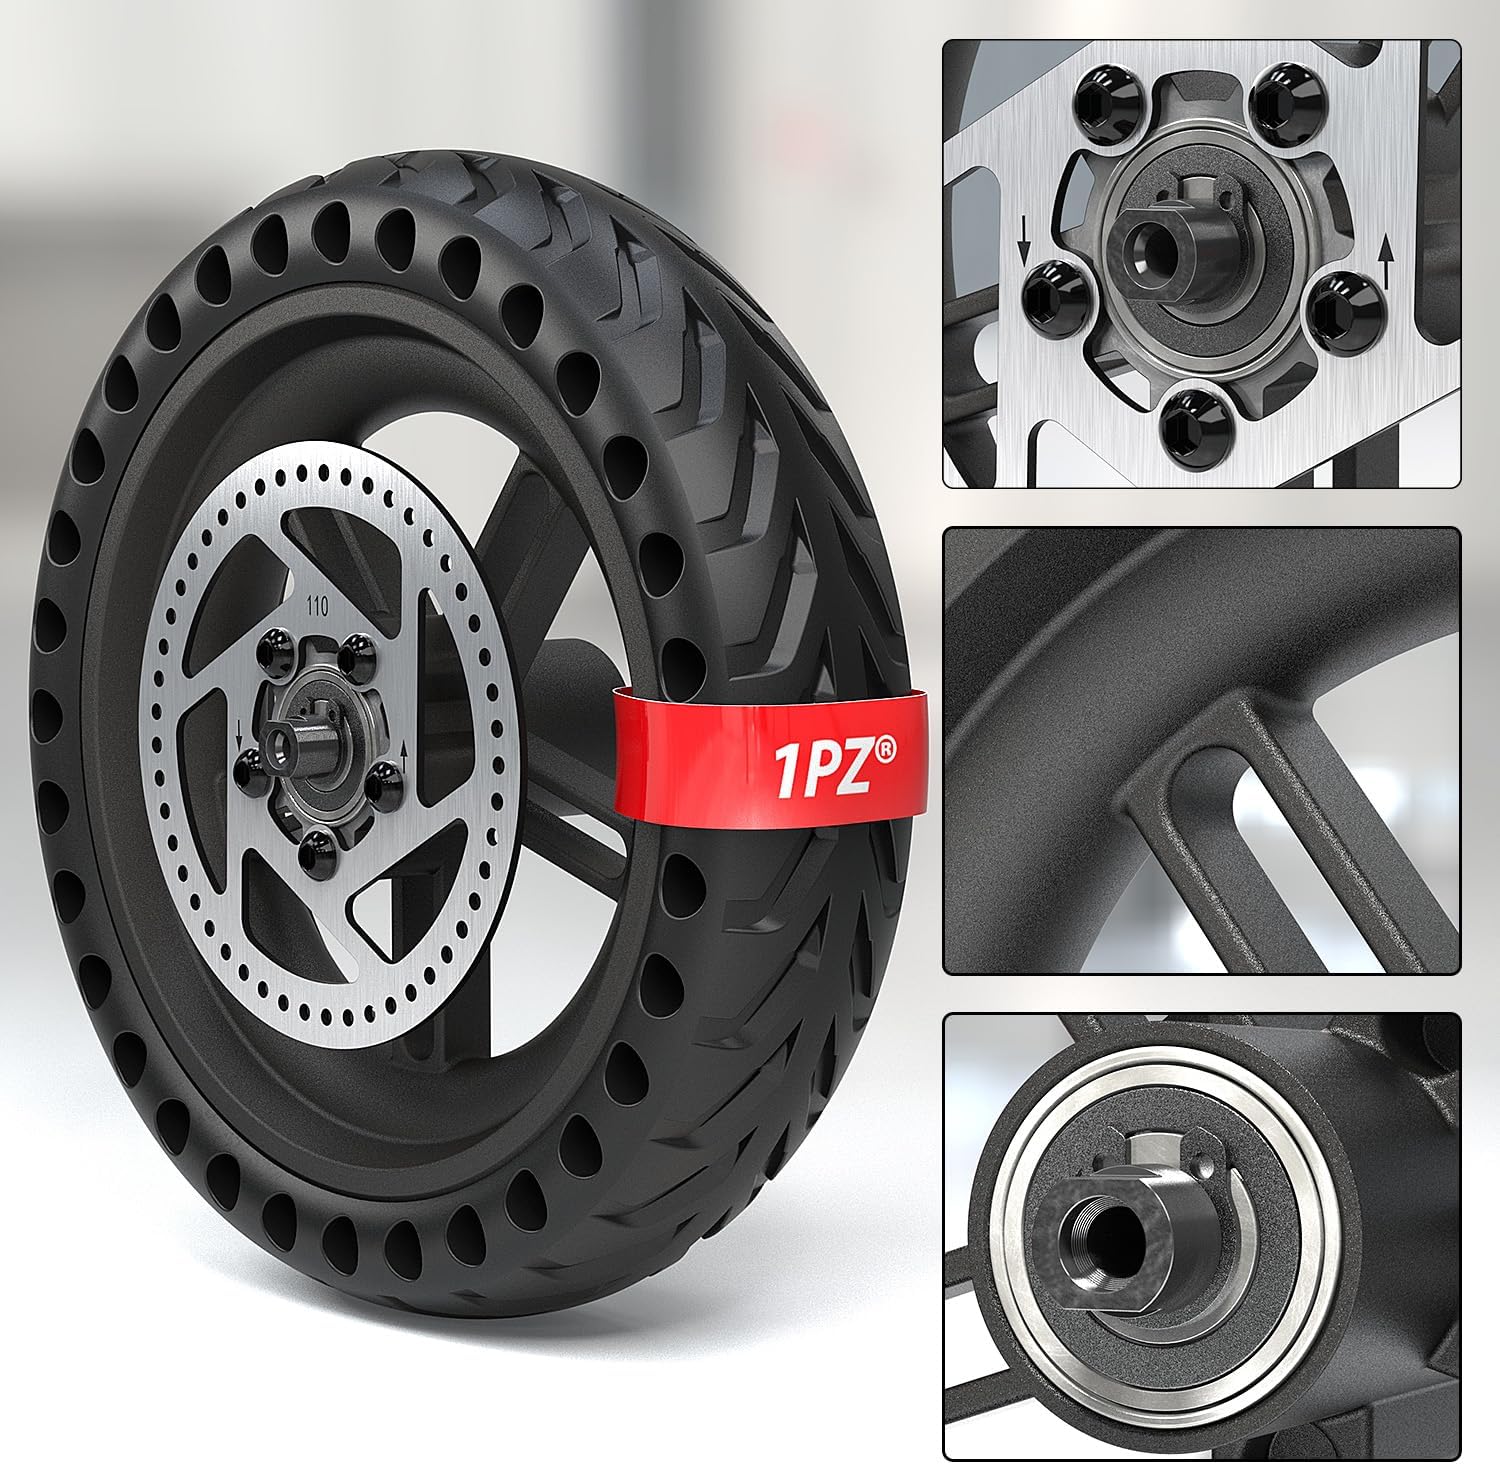 1PZ 8.5 Inch Solid Tire Rear Wheel with Brake Disk Replacement for Xiaomi M365 Pro Pro2 Electric Scooter